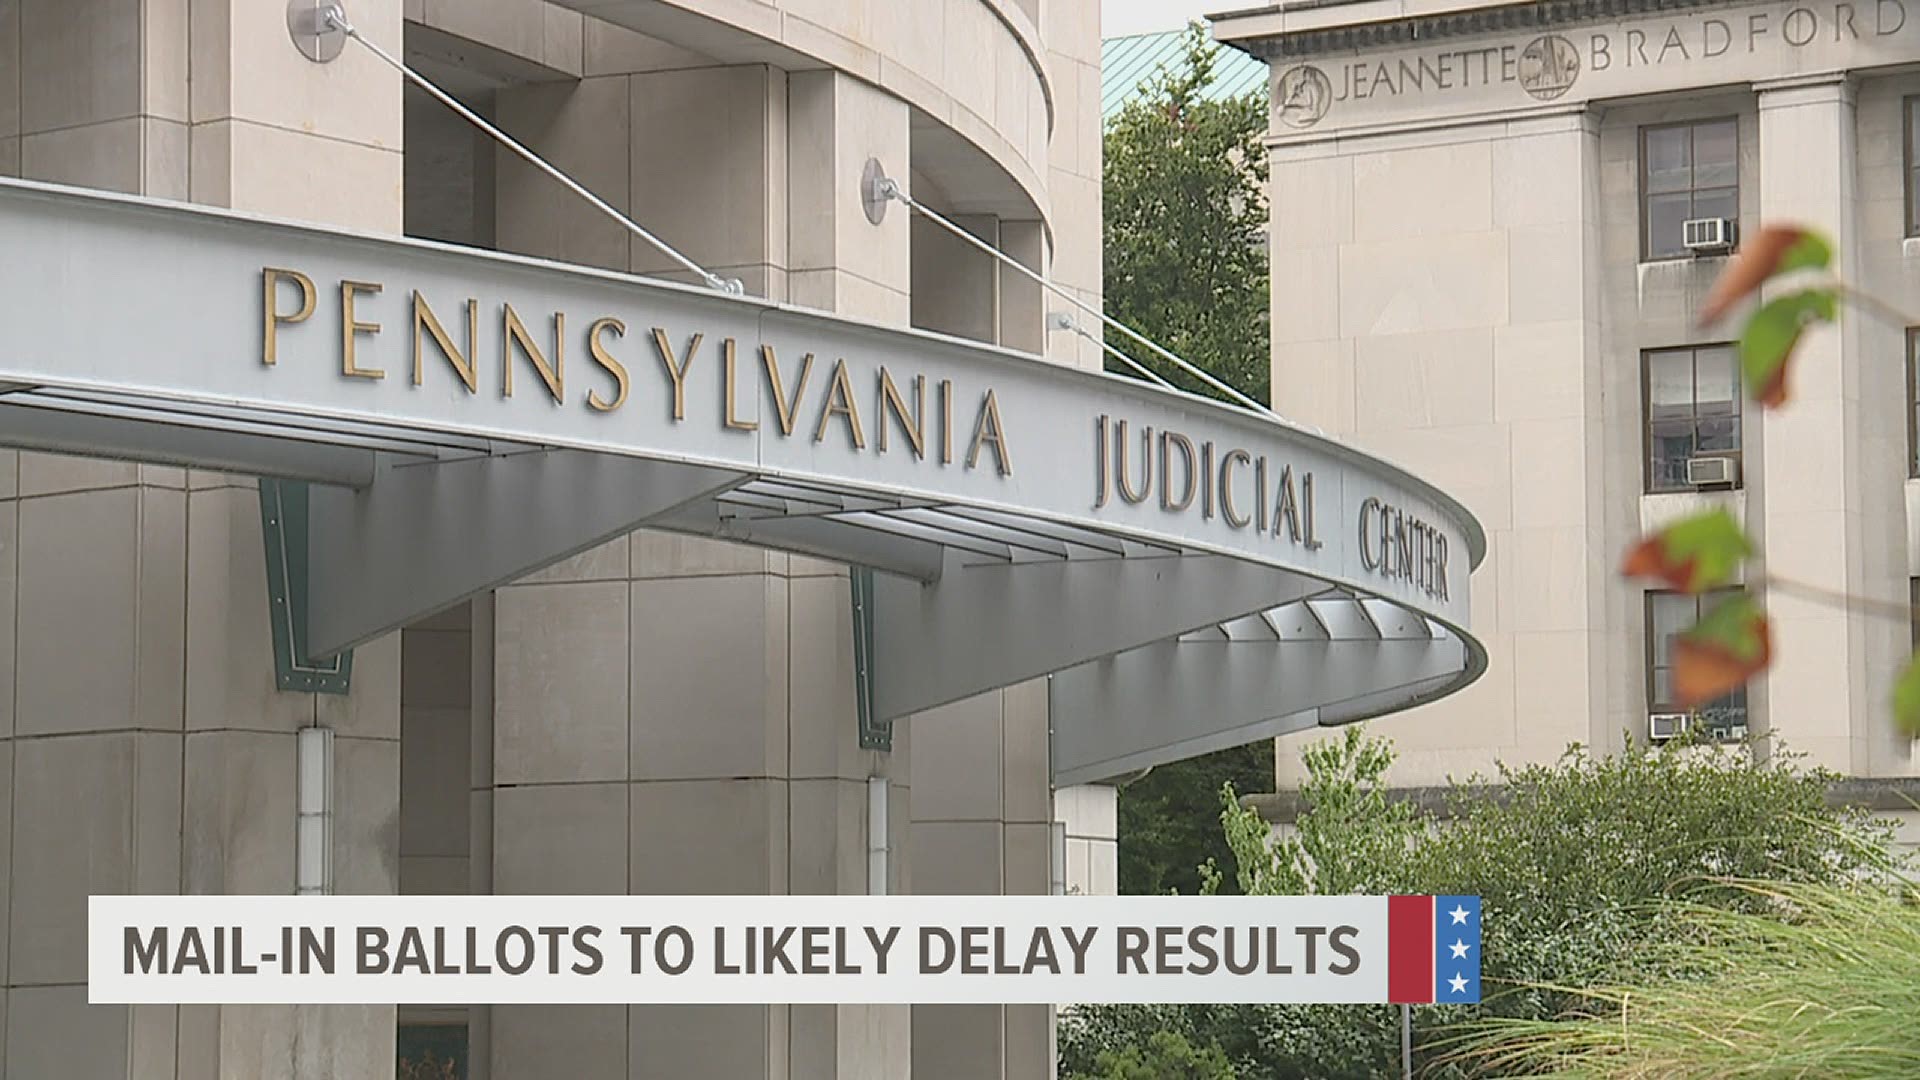 The Pennsylvania Supreme Court ruled mail-in ballots can be accepted the three days following the election, so long they are post marked by Nov. 3rd.